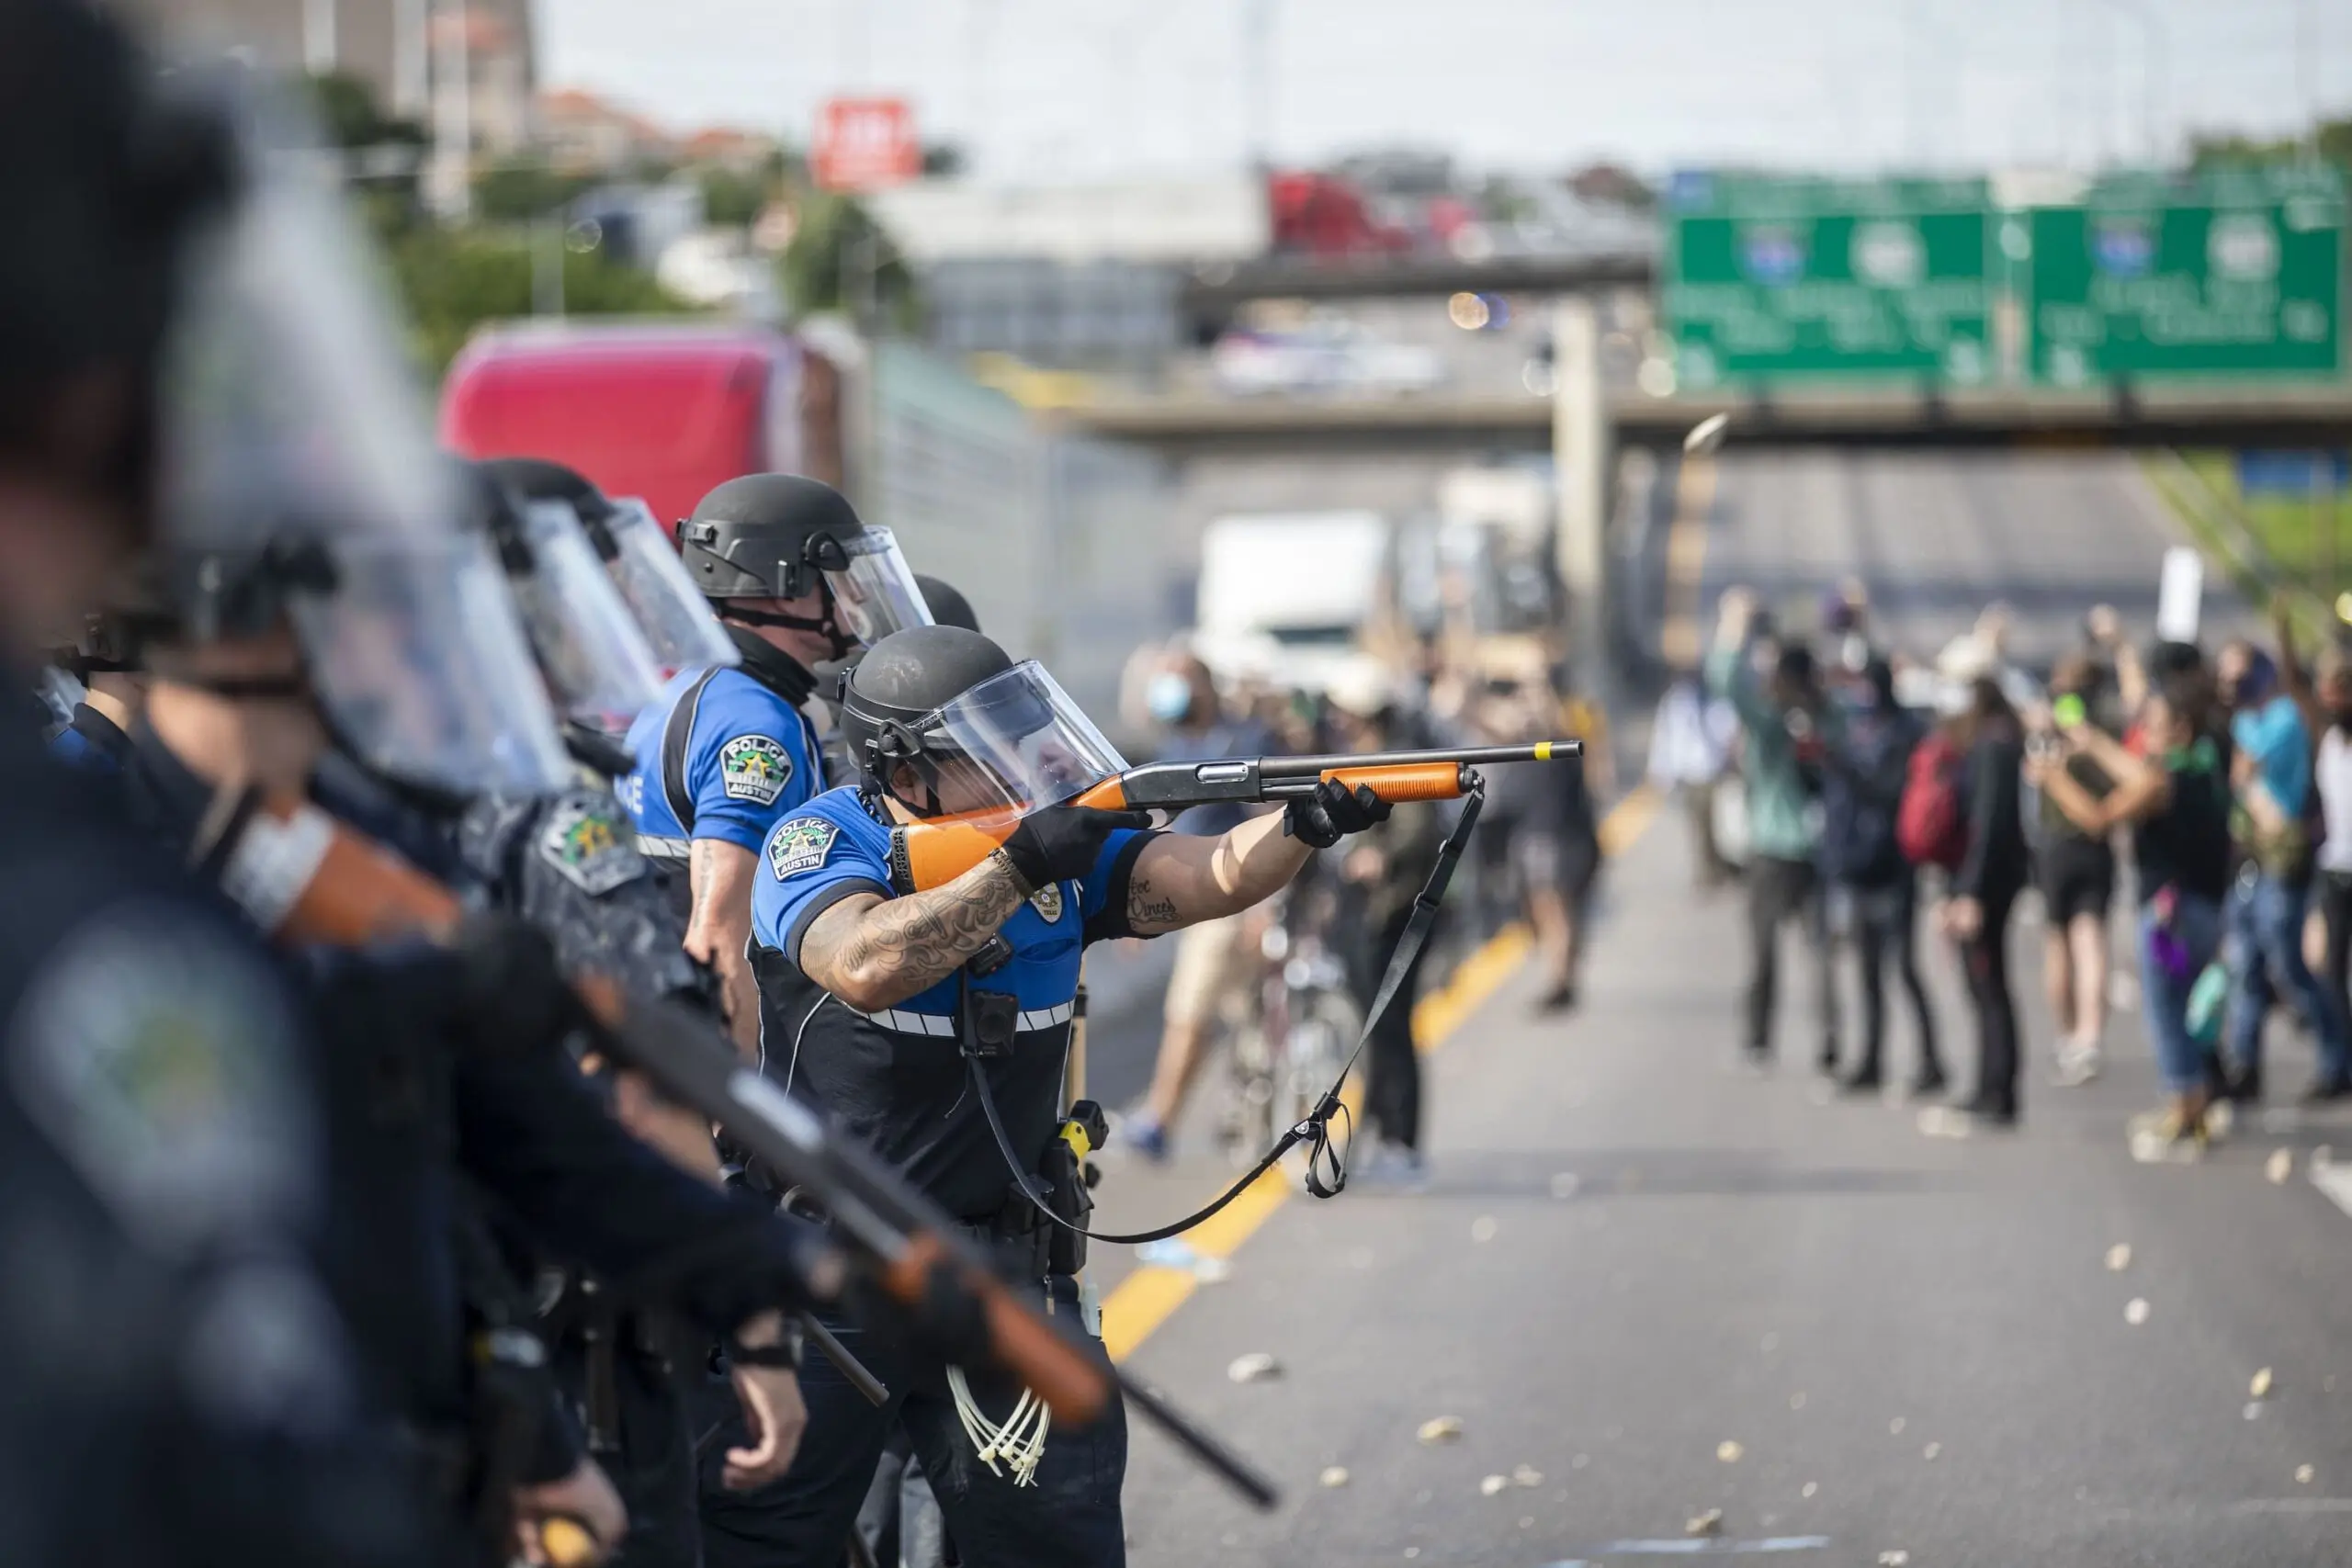 An Austin Police officer fires bean-bag rounds into a crowd of protesters on May 30, 2020.